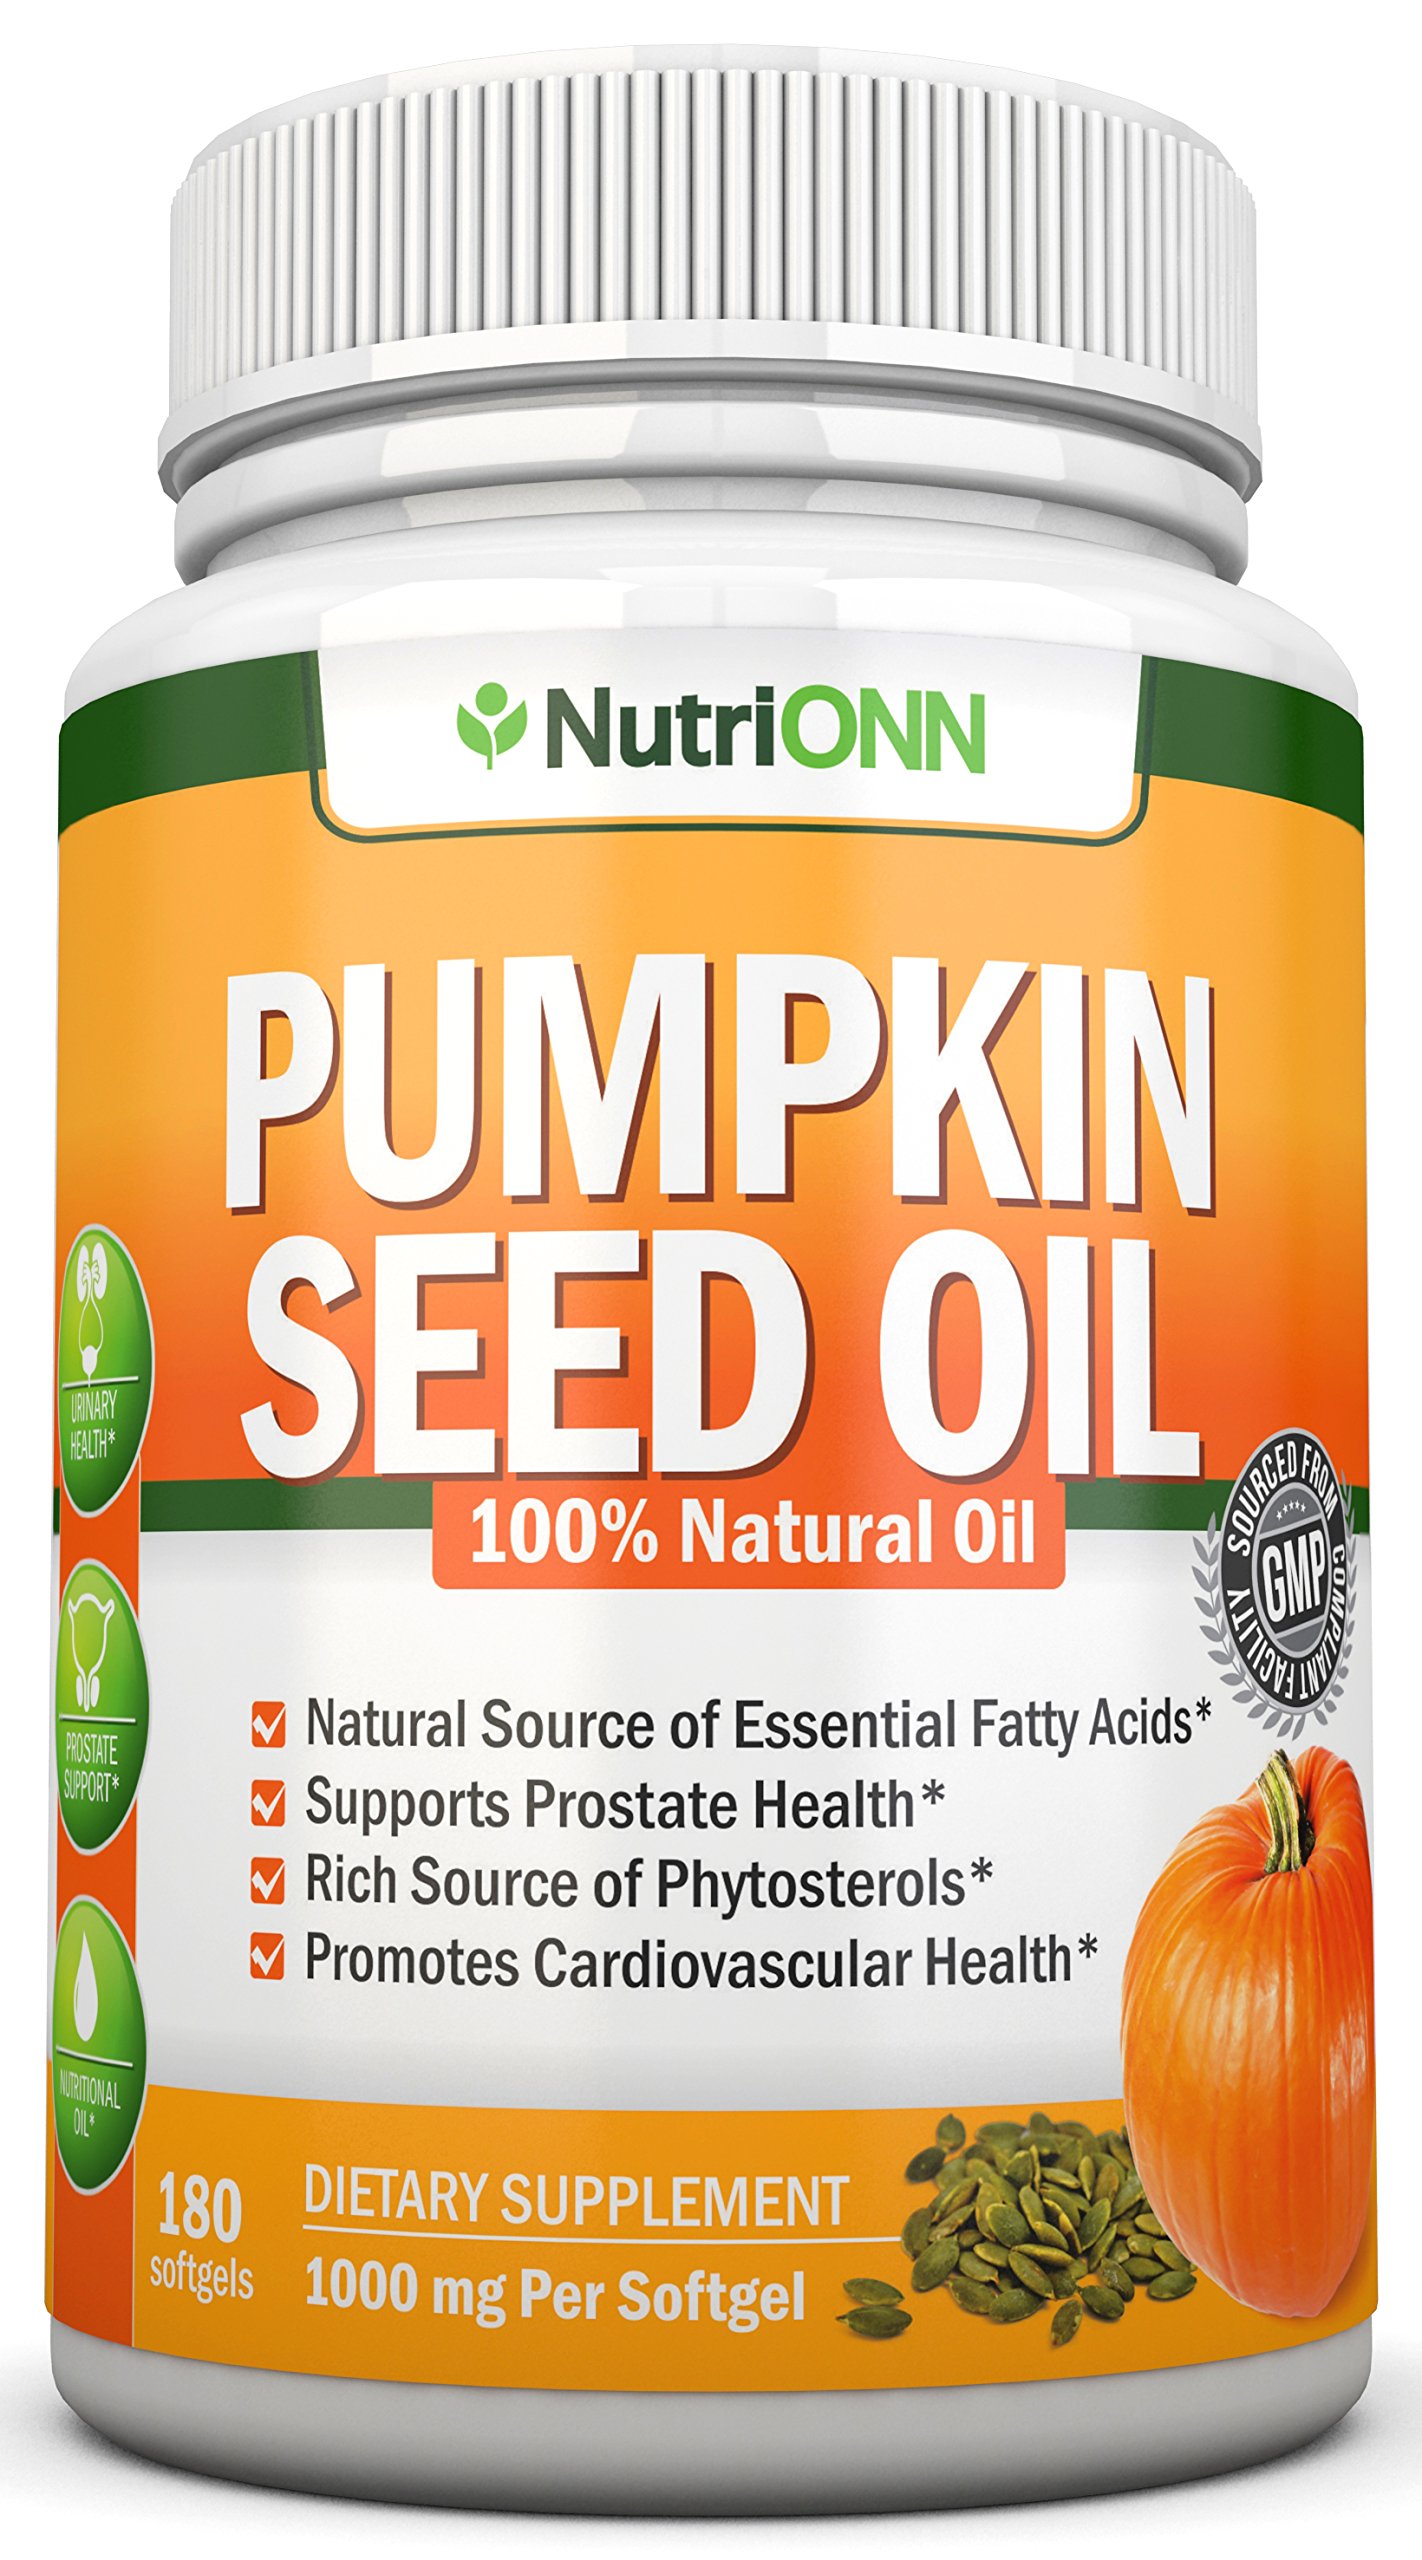 Pumpkin Seed Oil - 1000MG - 180 Softgels - Cold-Pressed Natural Pumpkin  Seed Oil - Natural Source of Essential Fatty Acids - Great for Hair Growth,  Prostate Health, Joint Health and GI Tract